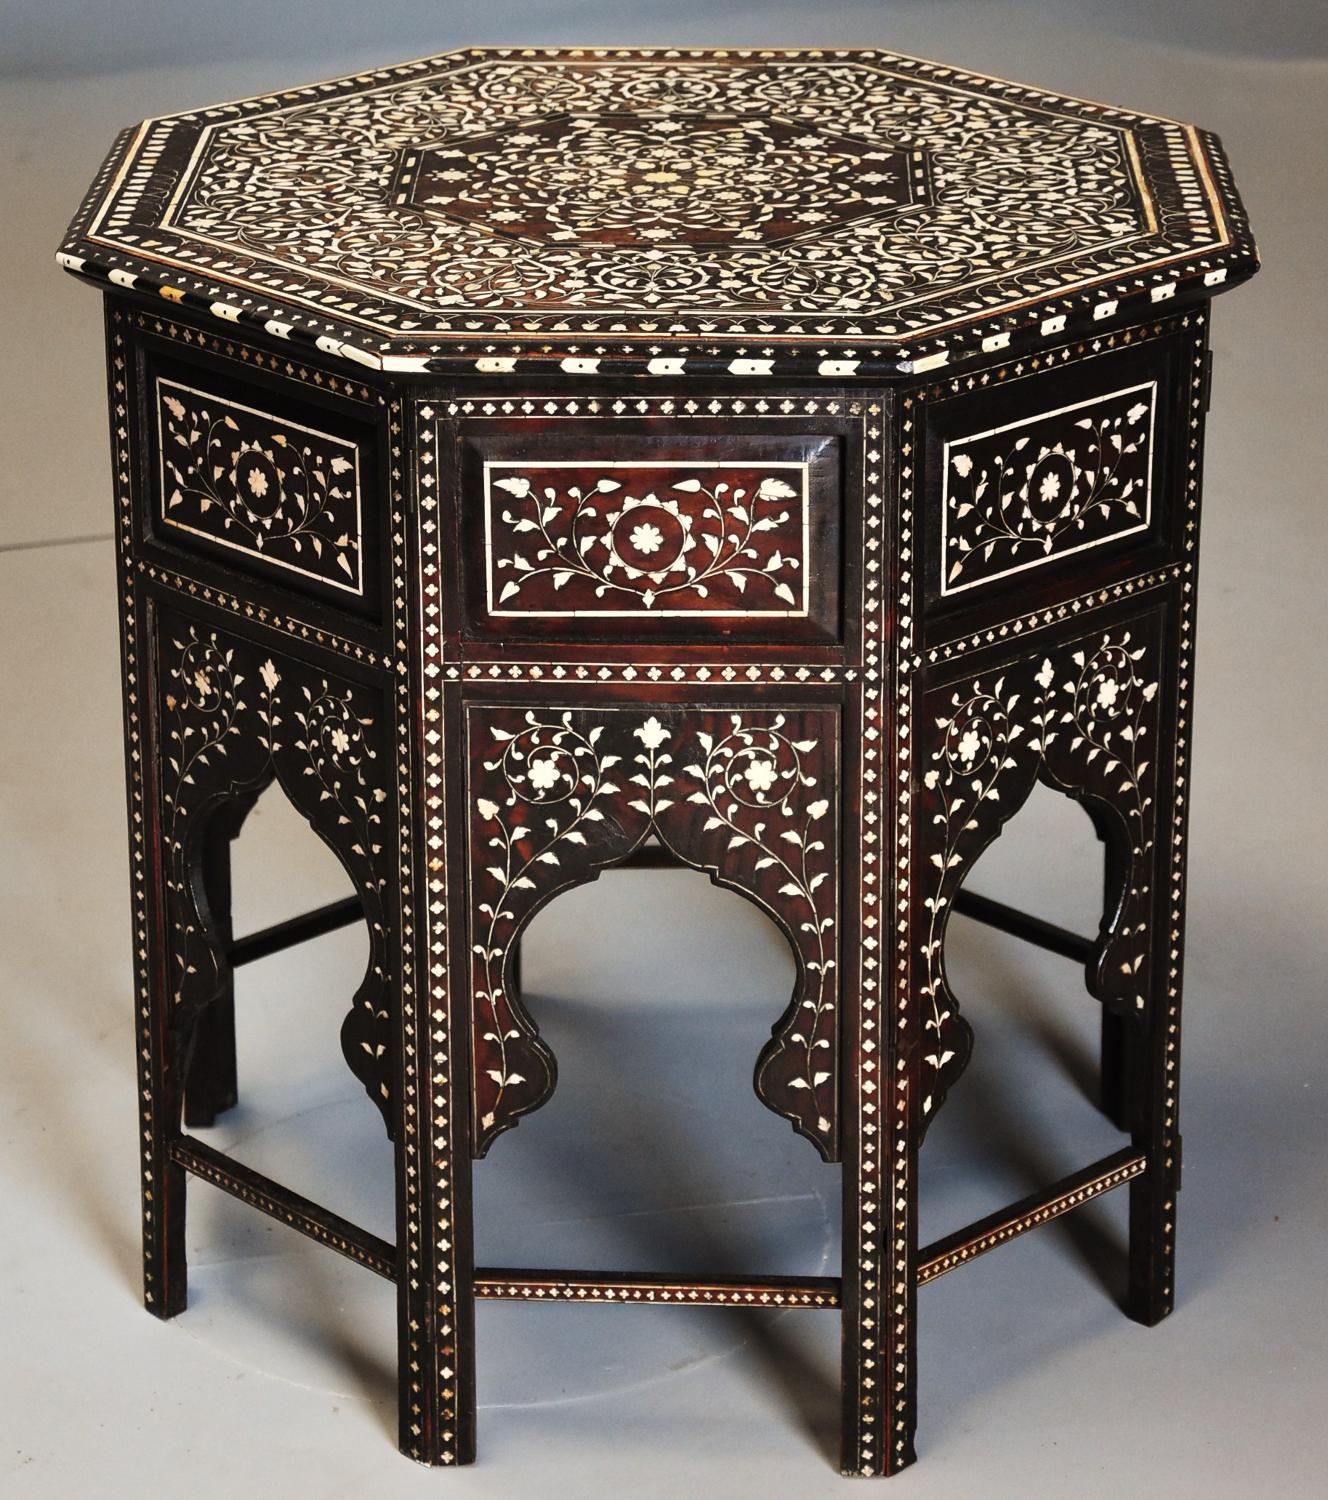 19th century profusely inlaid Anglo Indian octagonal table